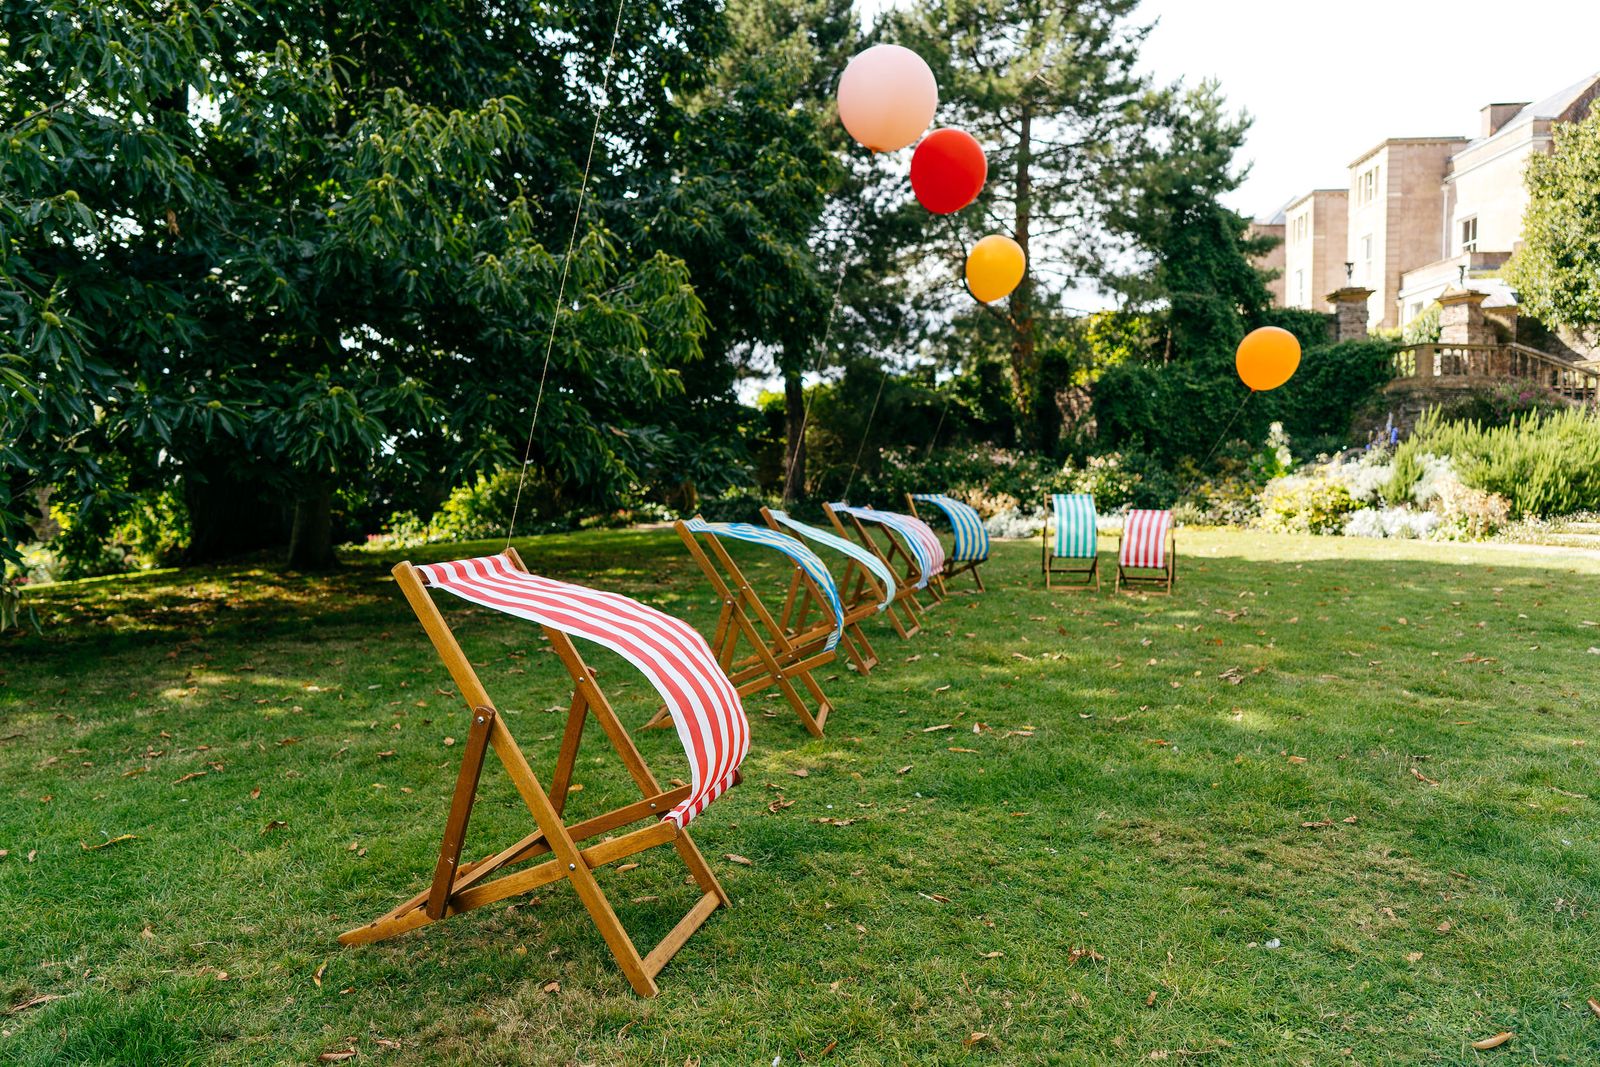 Deck chairs and balloons for outdoor entertainment at this Somerset wedding